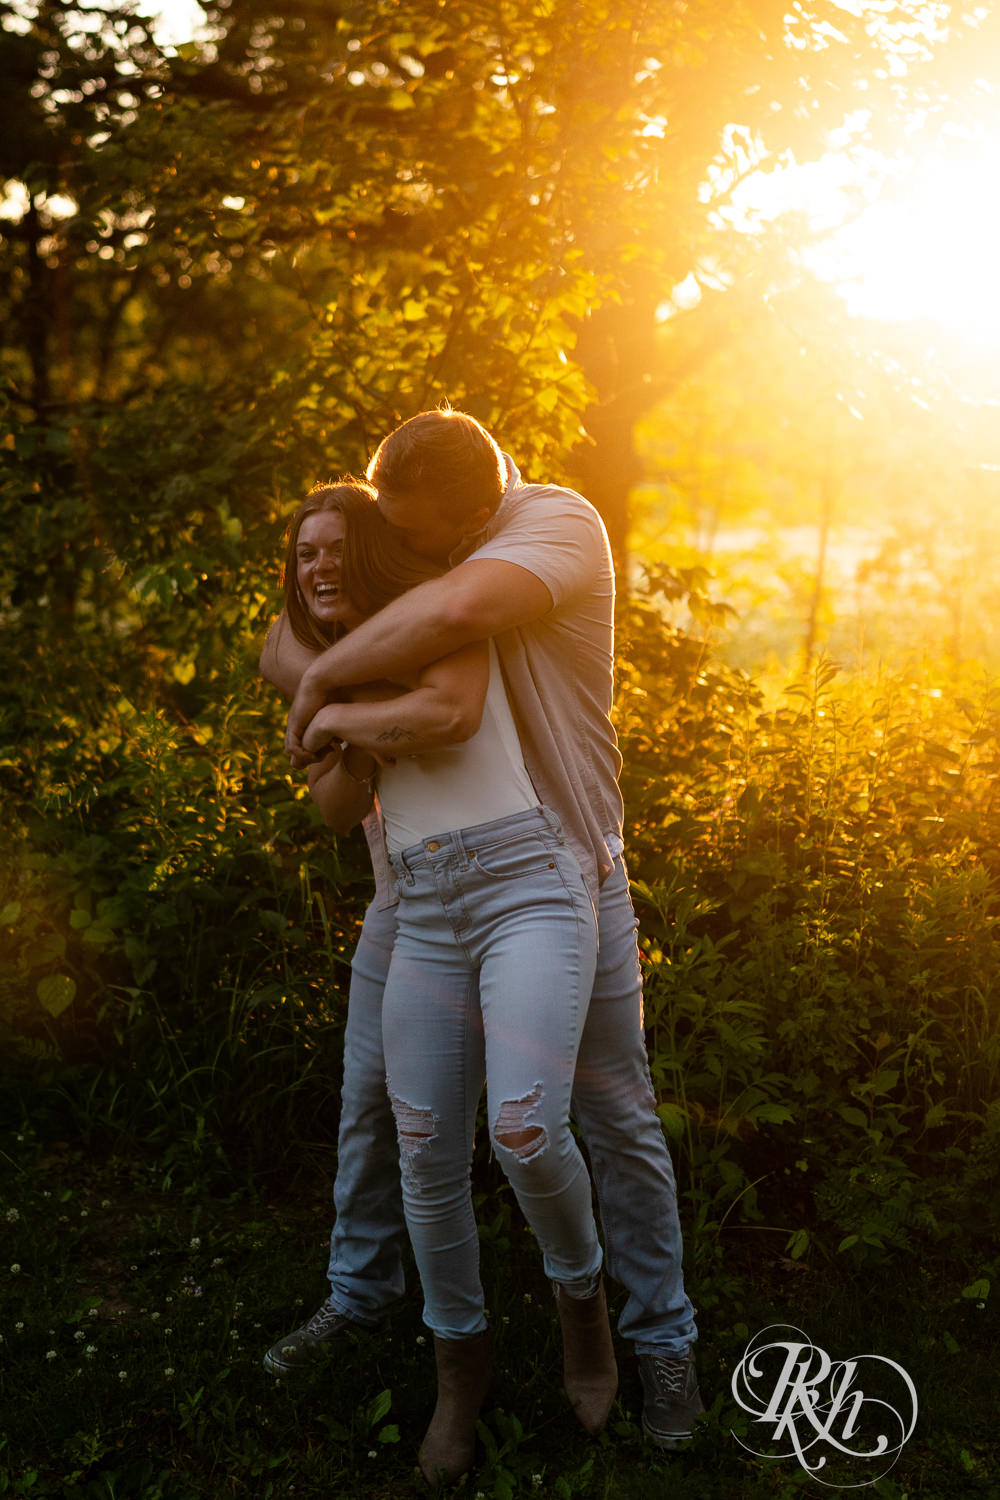 Man and woman in jeans laugh in field during golden hour engagement photography in Eagan, Minnesota.